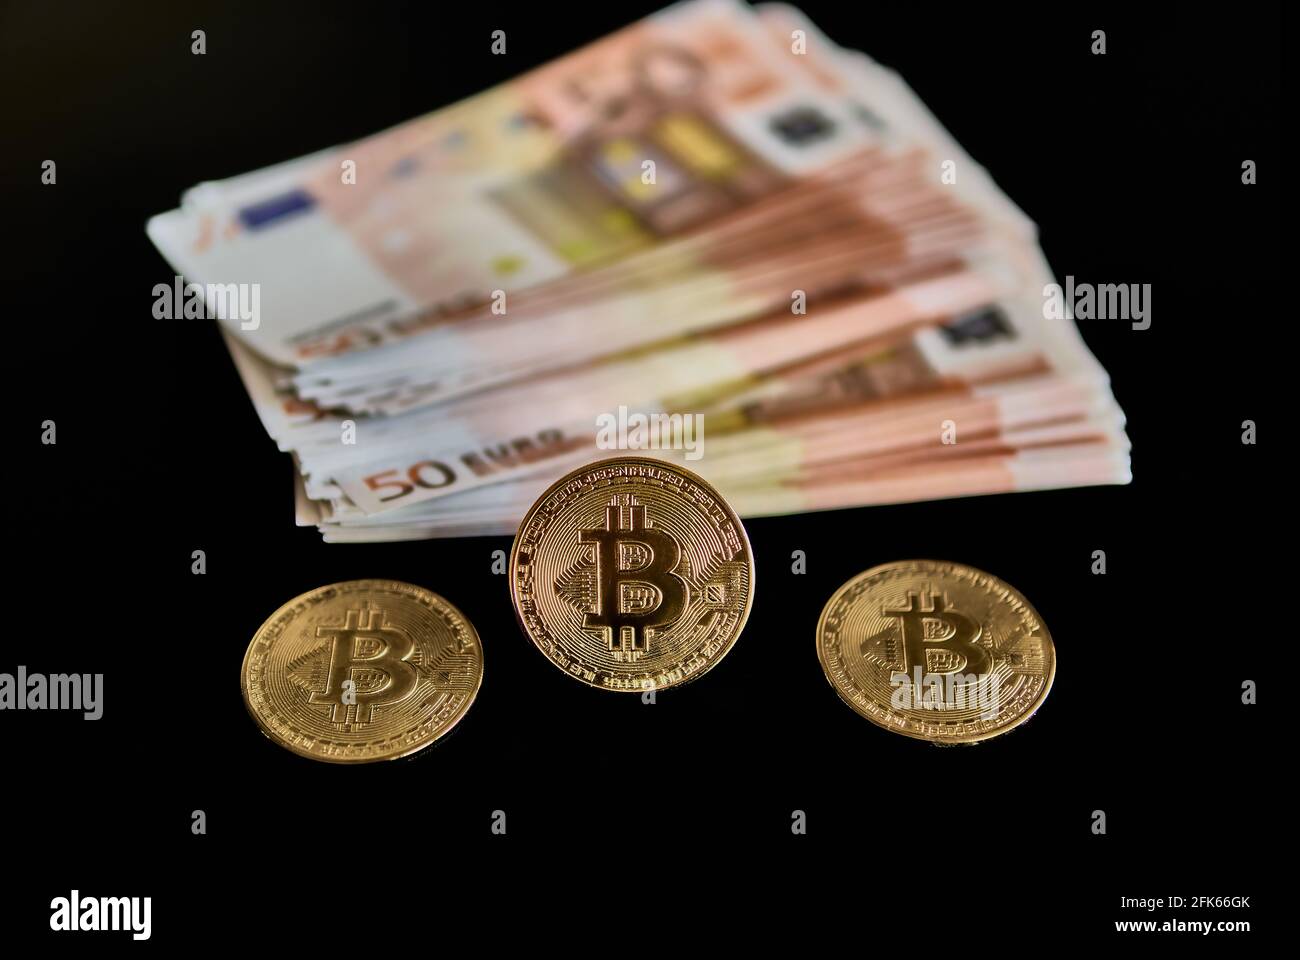 Top view of Bitcoin coins, next to 50 euro banknotes, on black background. Concept of power, economics, money, anonymity, exchange, Btc. Selective focus. Stock Photo